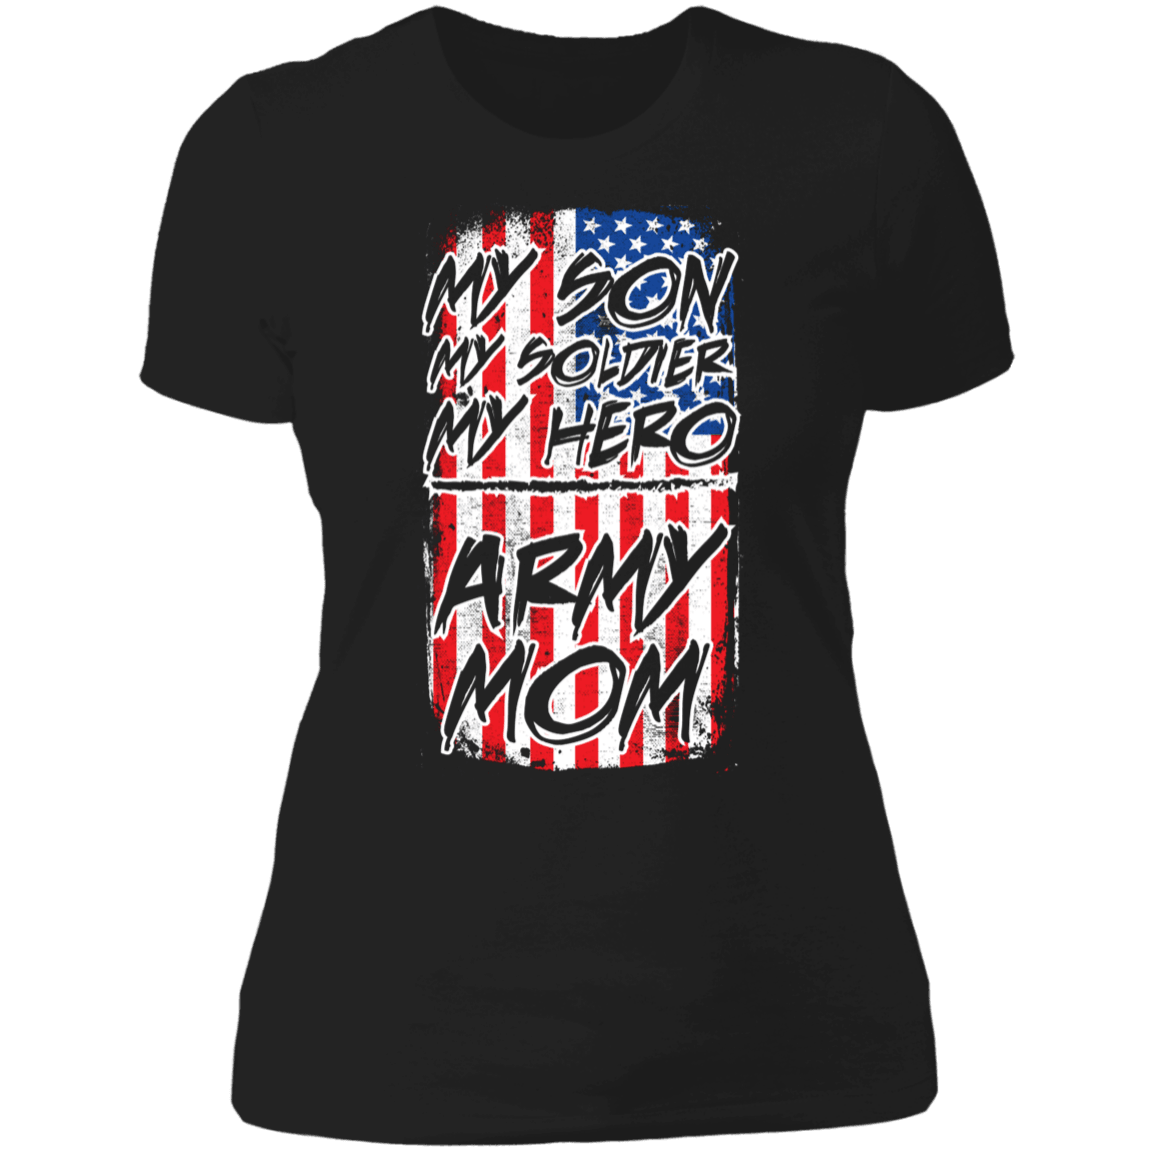 Designs by MyUtopia Shout Out:My Son My Soldier My Hero Army Mom Ladies' Boyfriend T-Shirt,X-Small / Black,T-Shirts